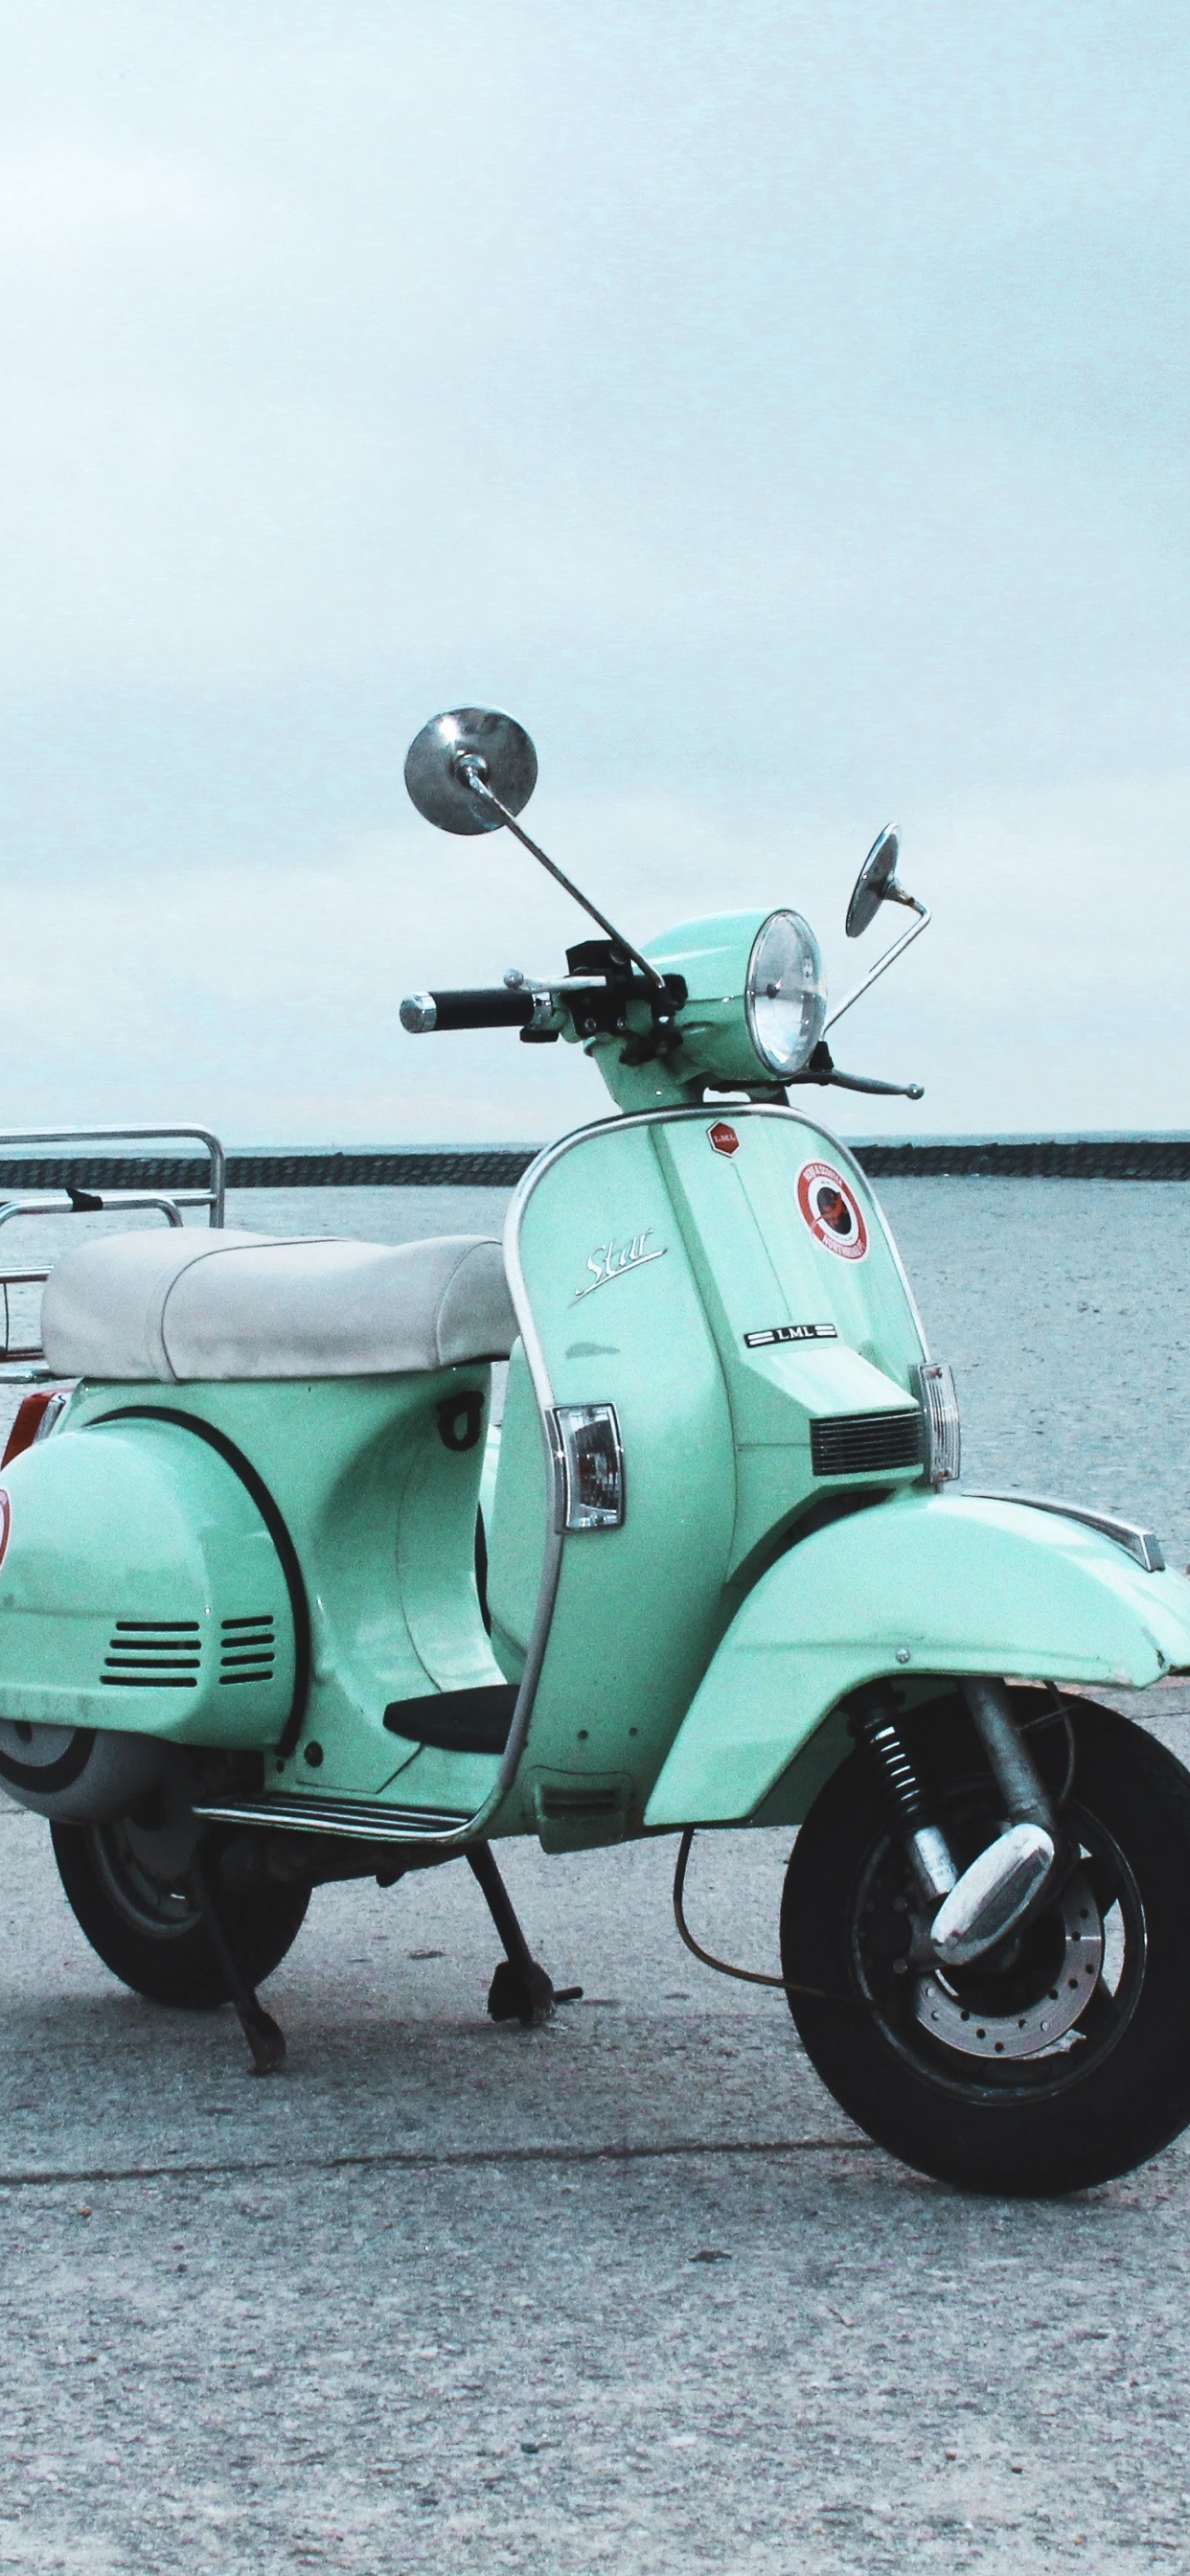 Green Motor Scooter Parked on Gray Concrete Pavement Near Body of Water During Daytime. Wallpaper in 1242x2688 Resolution